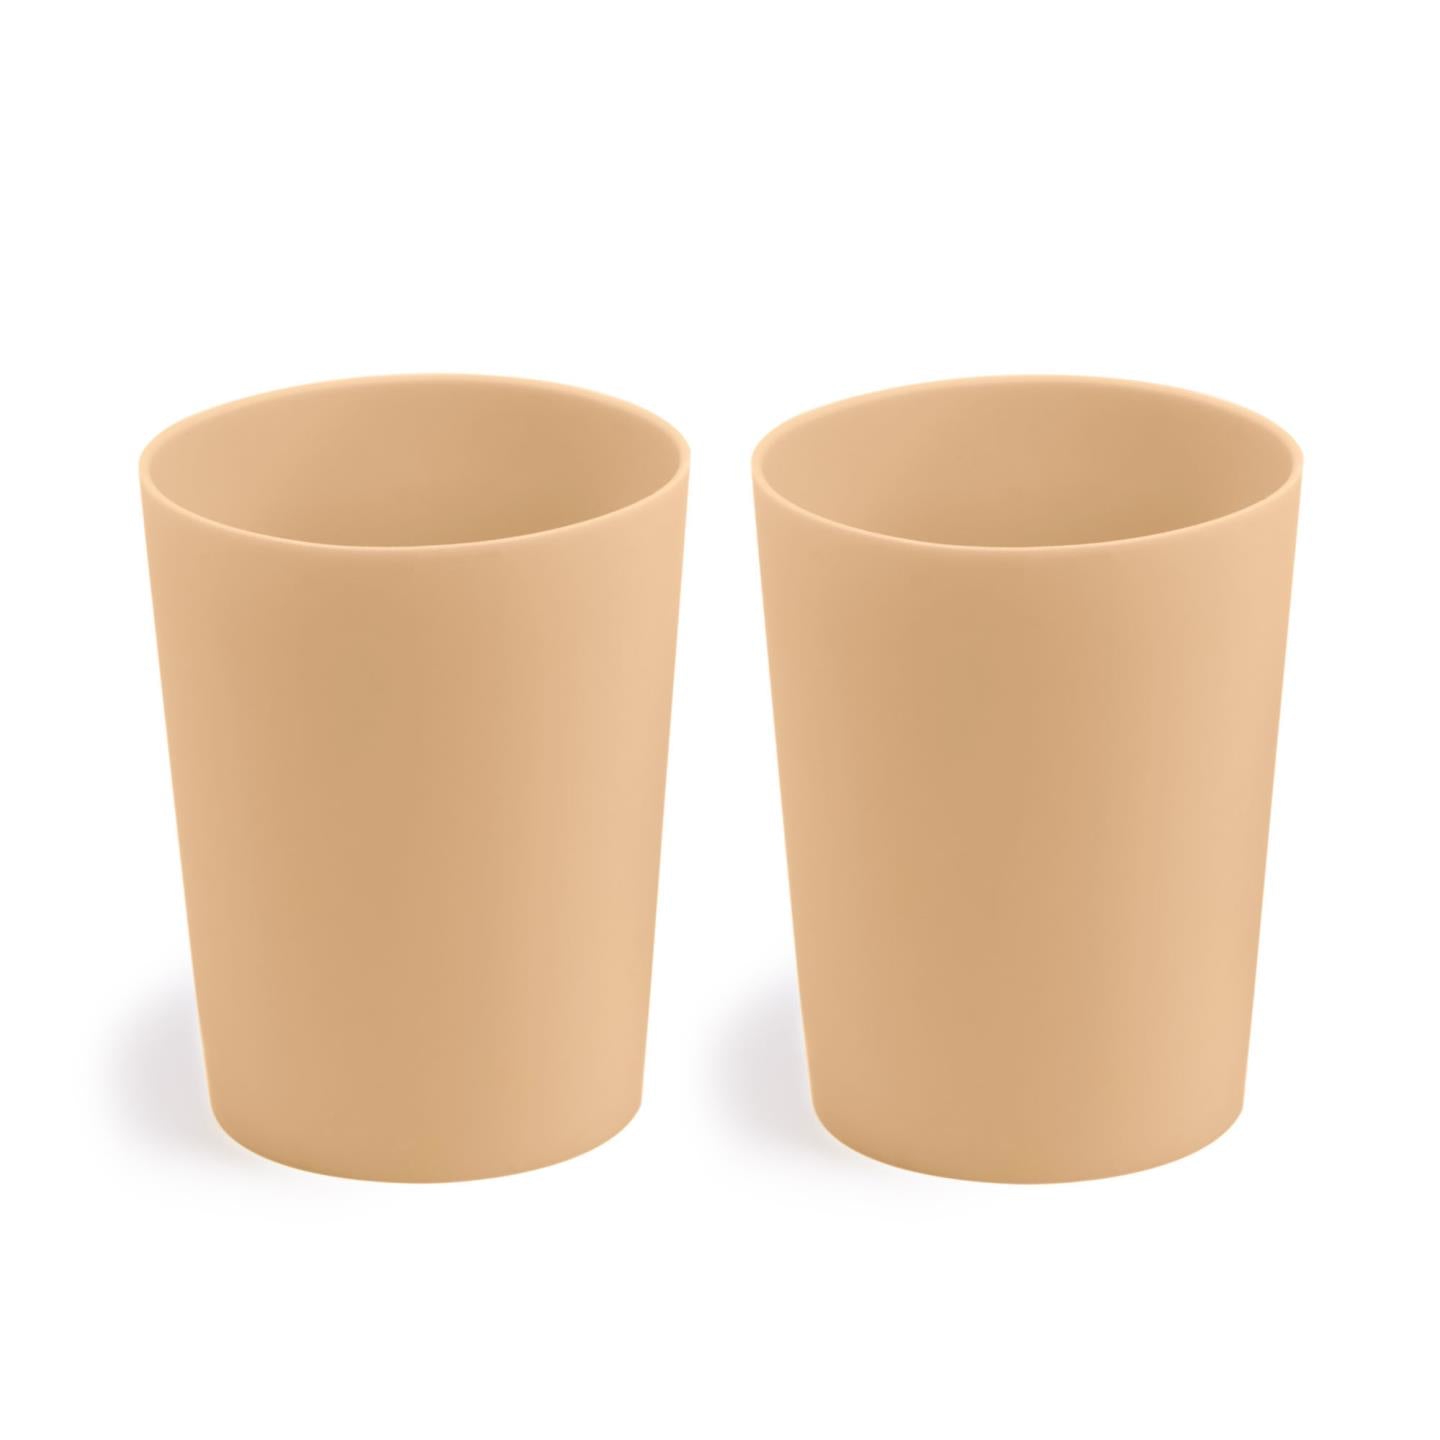 Epiphany set of 2 cups in beige silicone